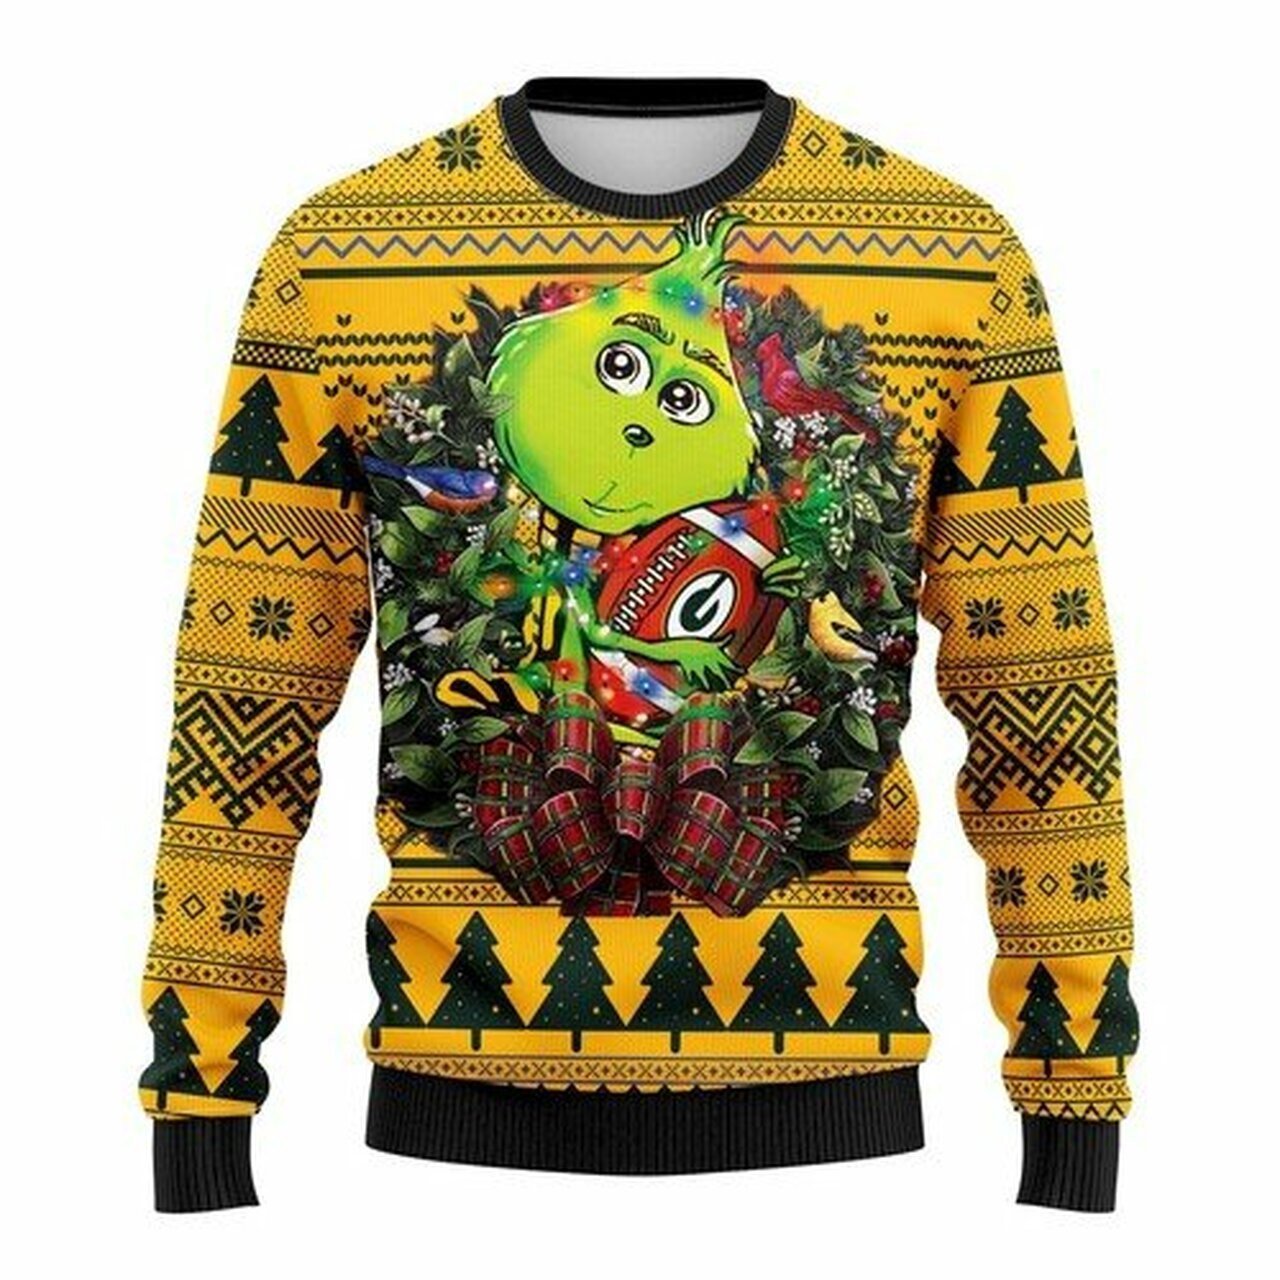 [ HOT ] NFL Green Bay Packers Grinch hug ugly christmas sweater – Saleoff 040122